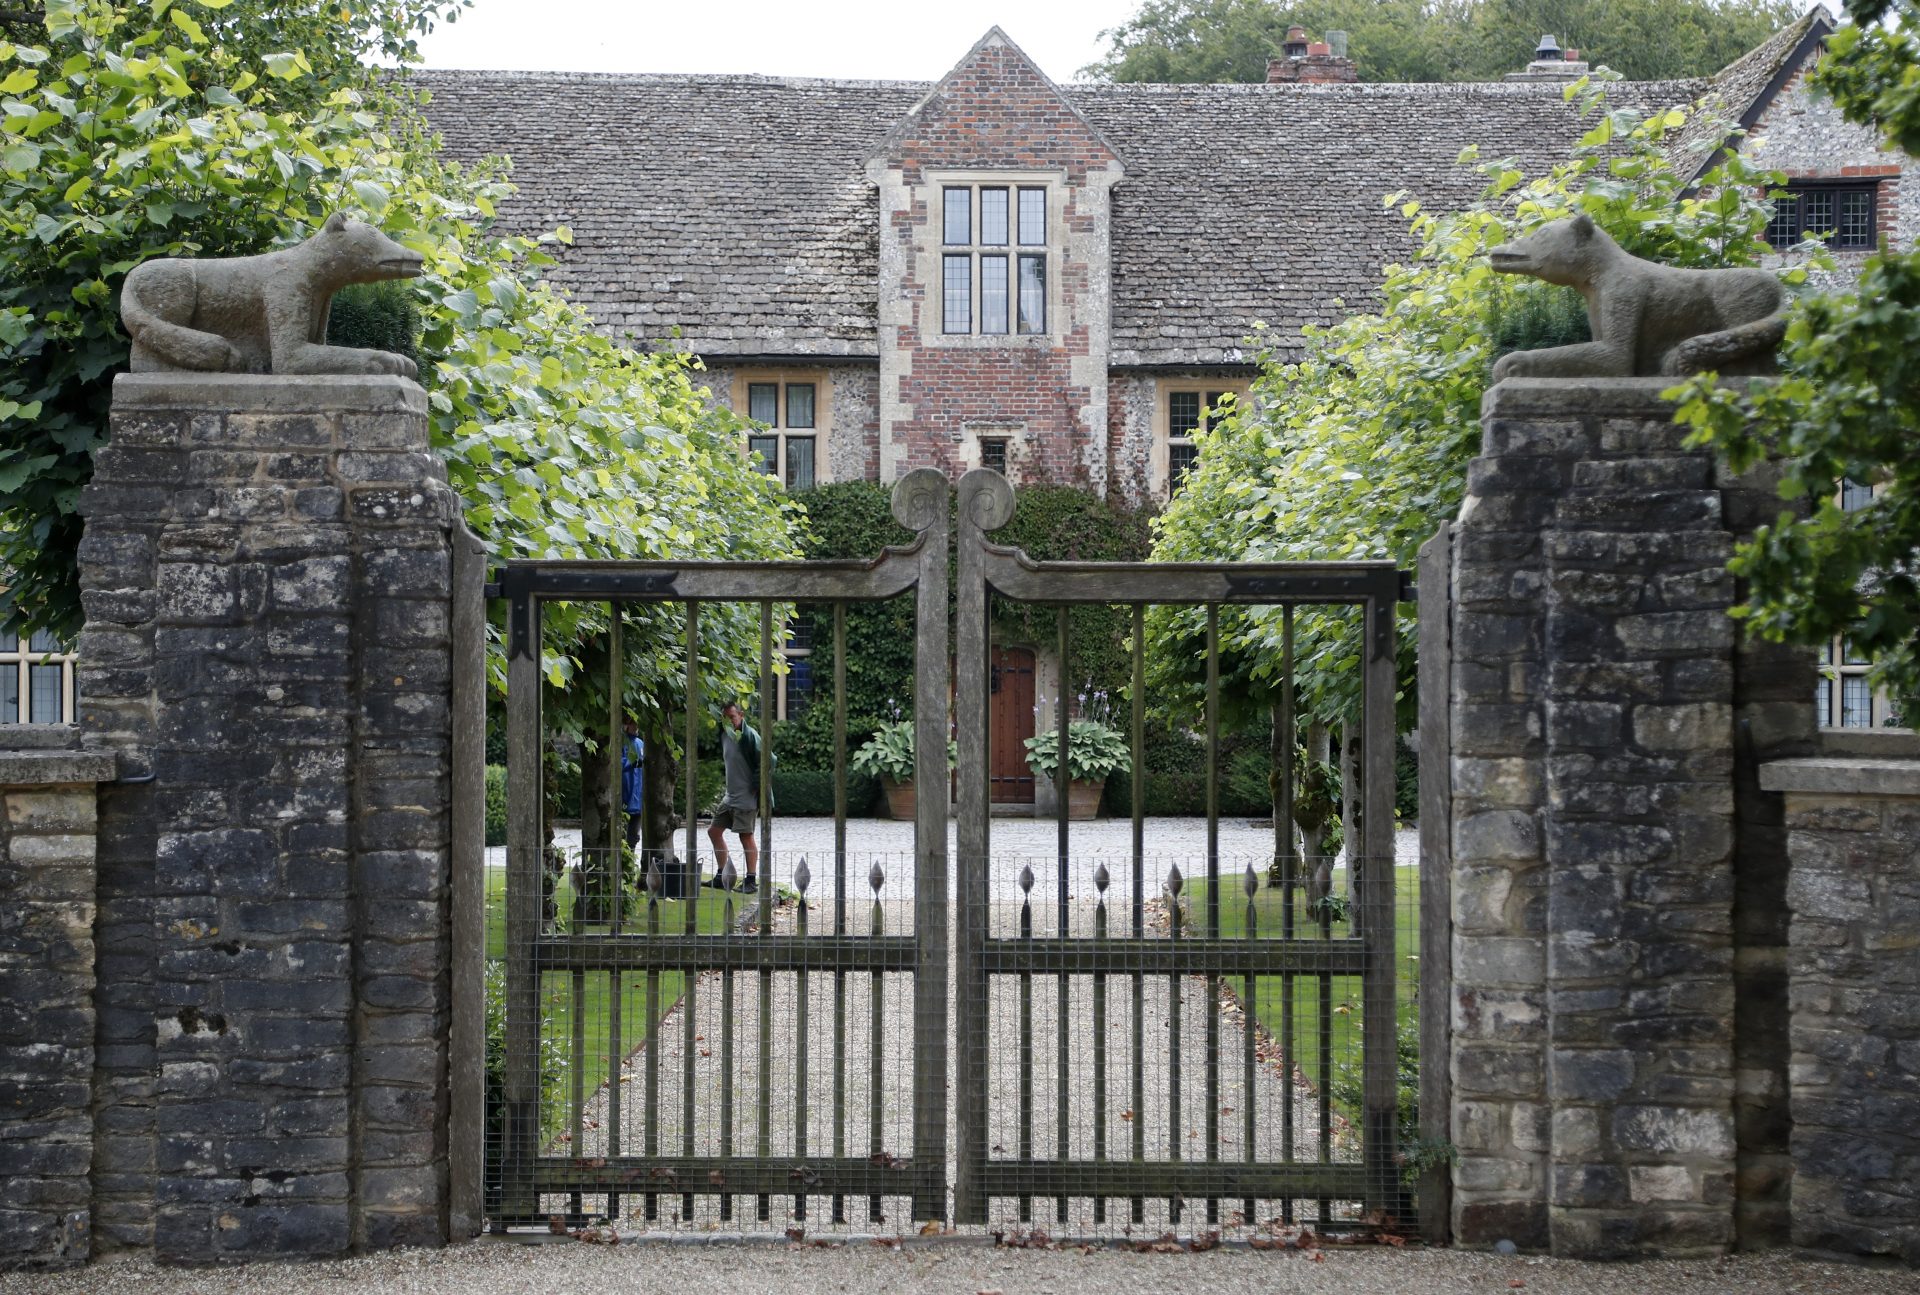 A gate protects the entrance of the Rooksnest estate near Lambourn, England, Tuesday, Aug. 6, 2019. The manor is the domain of Theresa Sackler, widow of one of Purdue Pharma’s founders and, until 2018, a member of the company’s board of directors. A complex web of companies and trusts are controlled by the family, and an examination reveals links between far-flung holdings, far removed from the opioid manufacturer’s headquarters in Stamford, Conn.